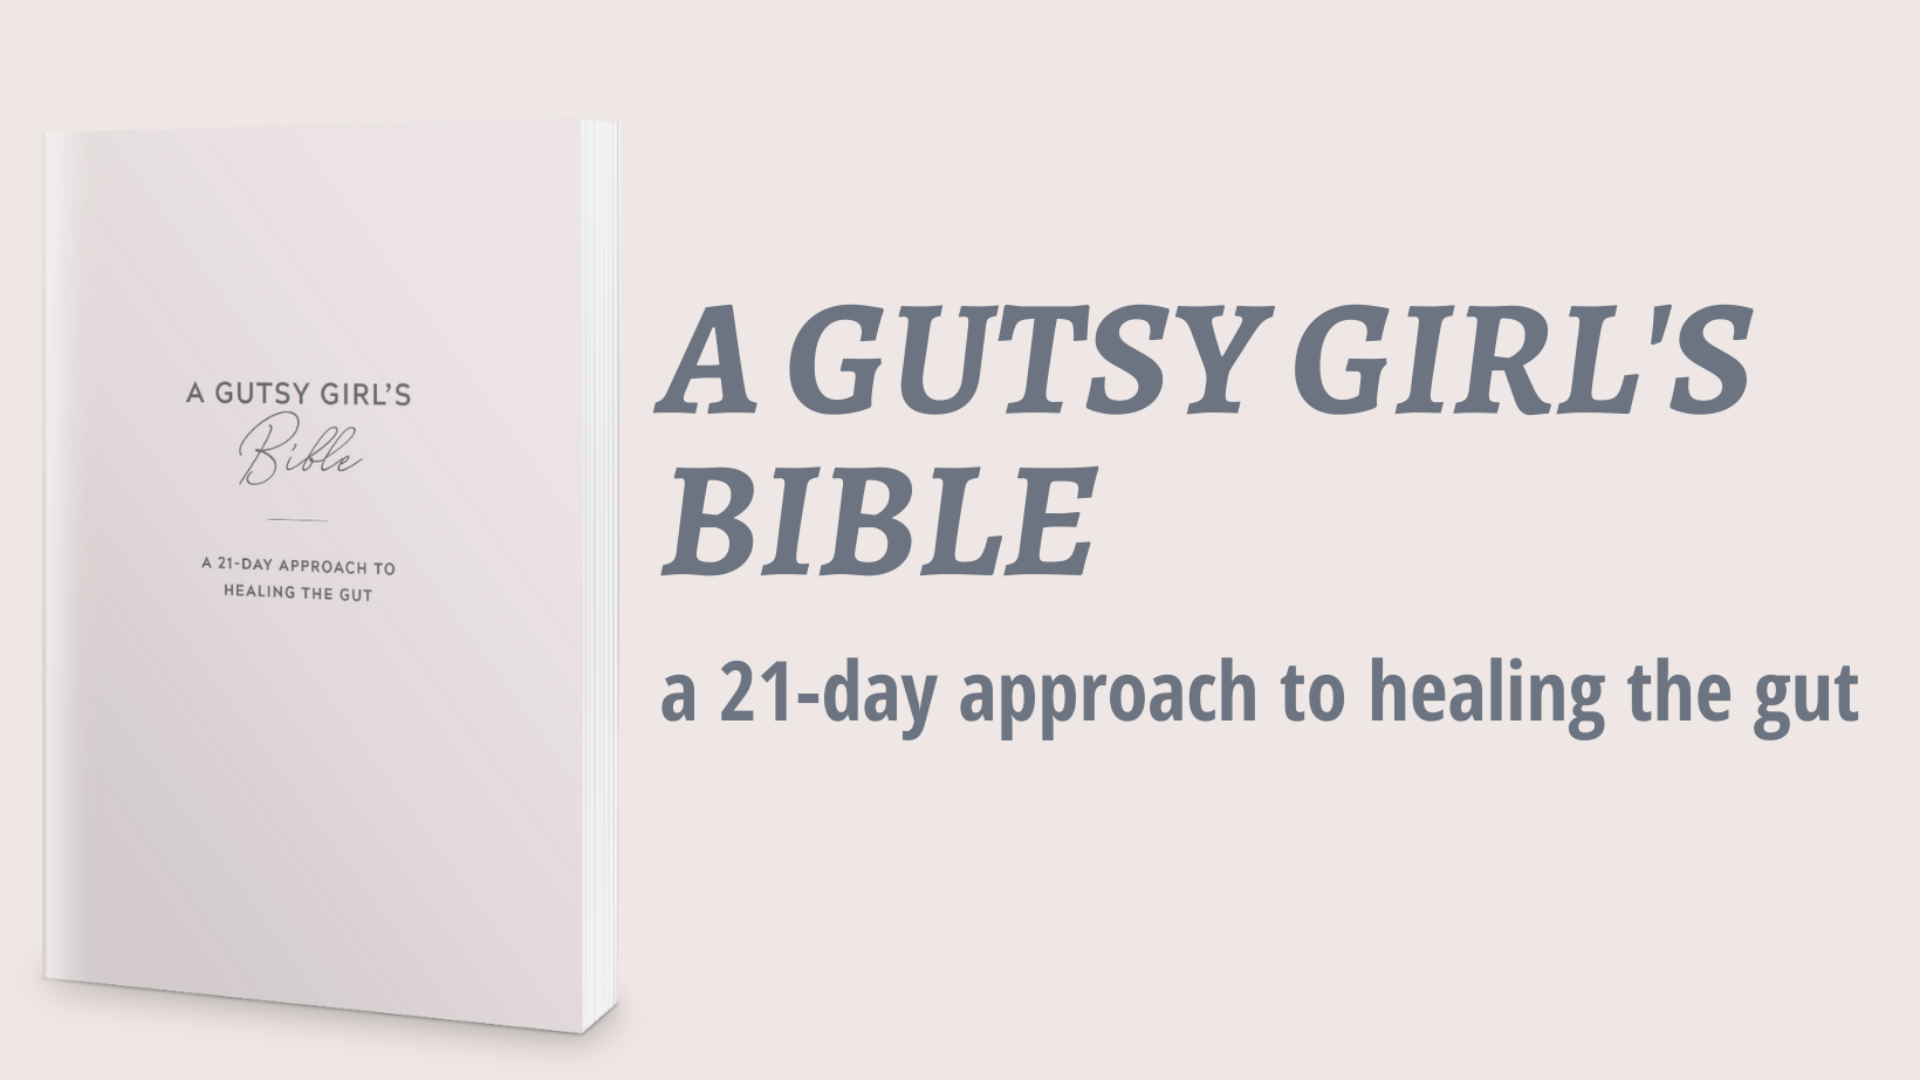 A Gutsy Girl’s Bible: a 21-day approach to healing the gut